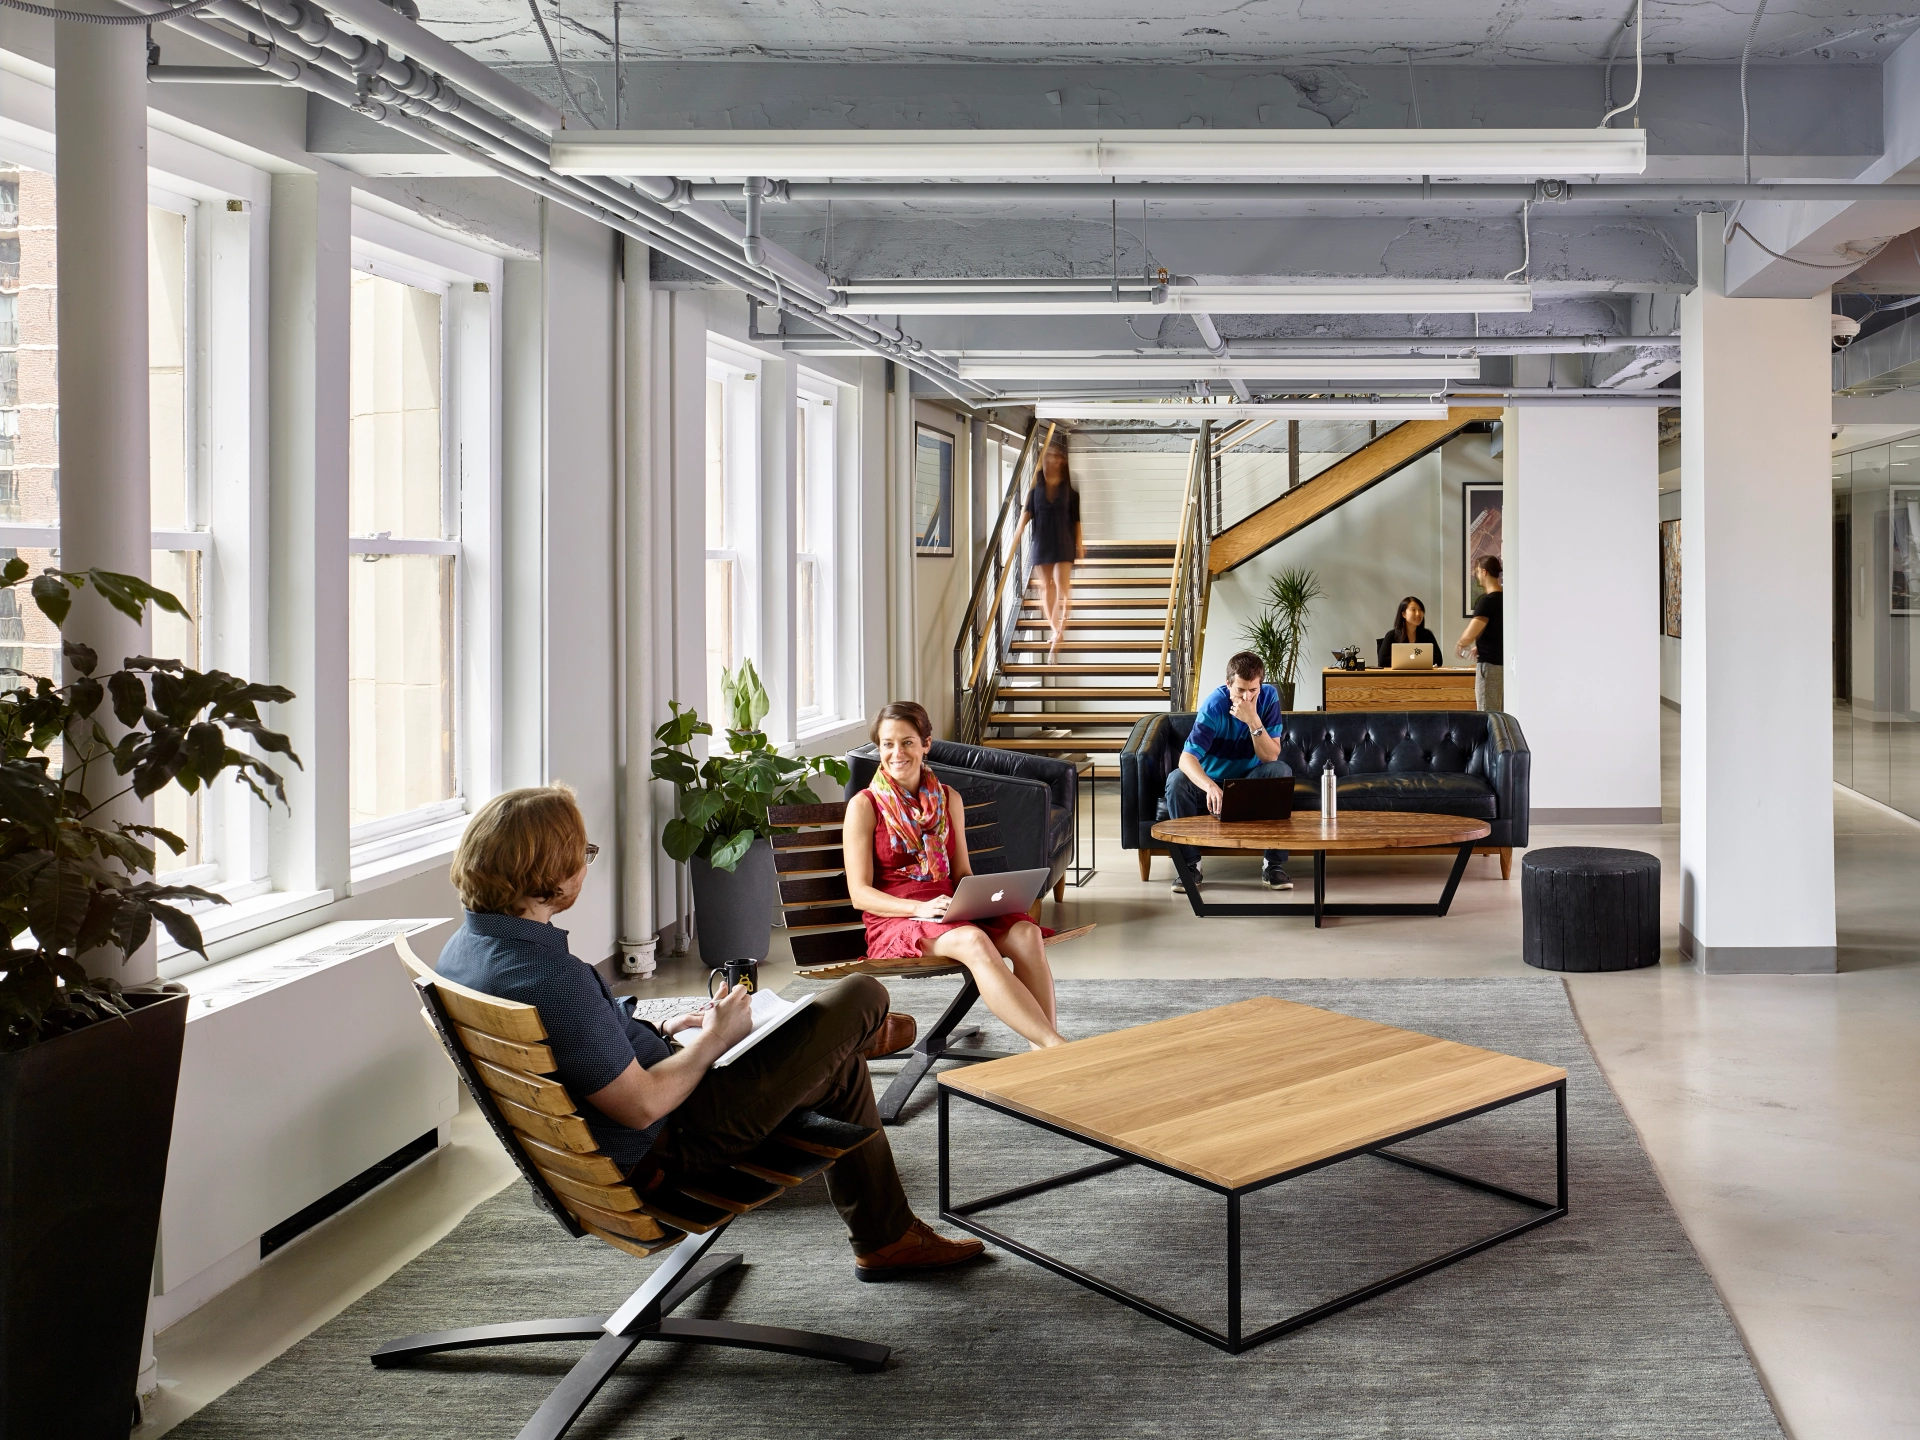 A group of people sitting in a Philadelphia office.